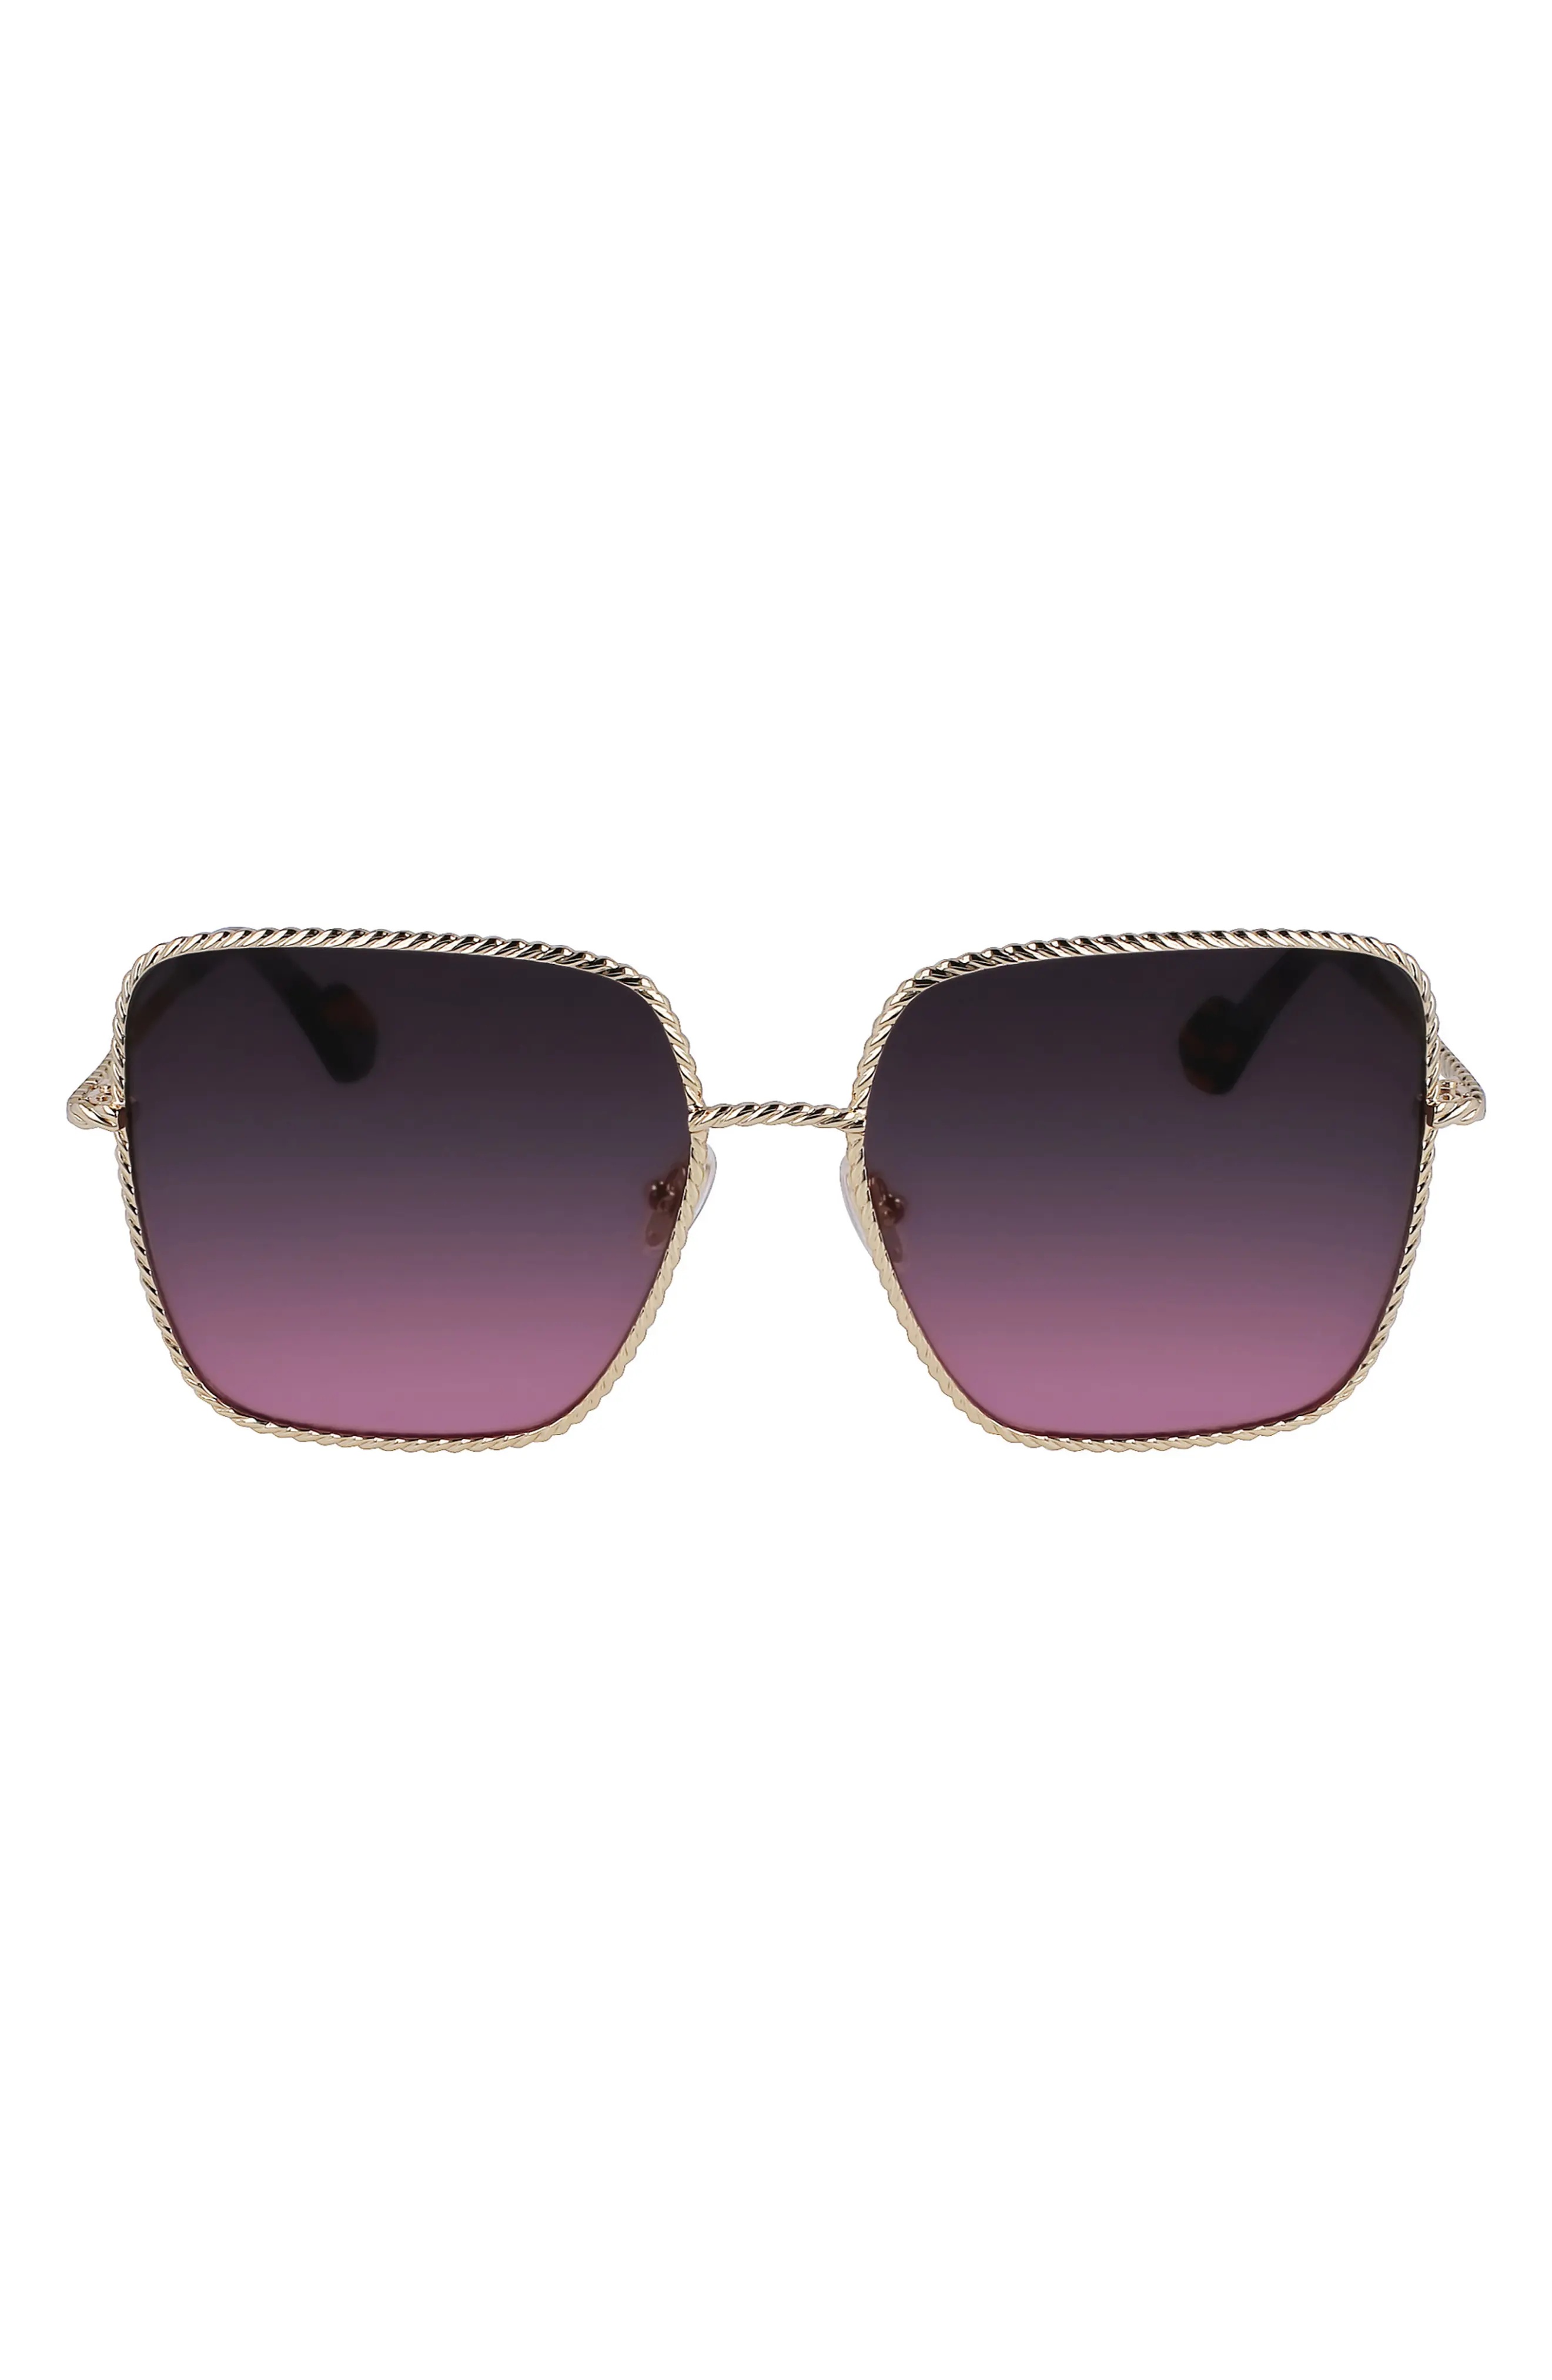 Babe 59mm Gradient Square Sunglasses in Gold/Gradient Grey Rose - 1